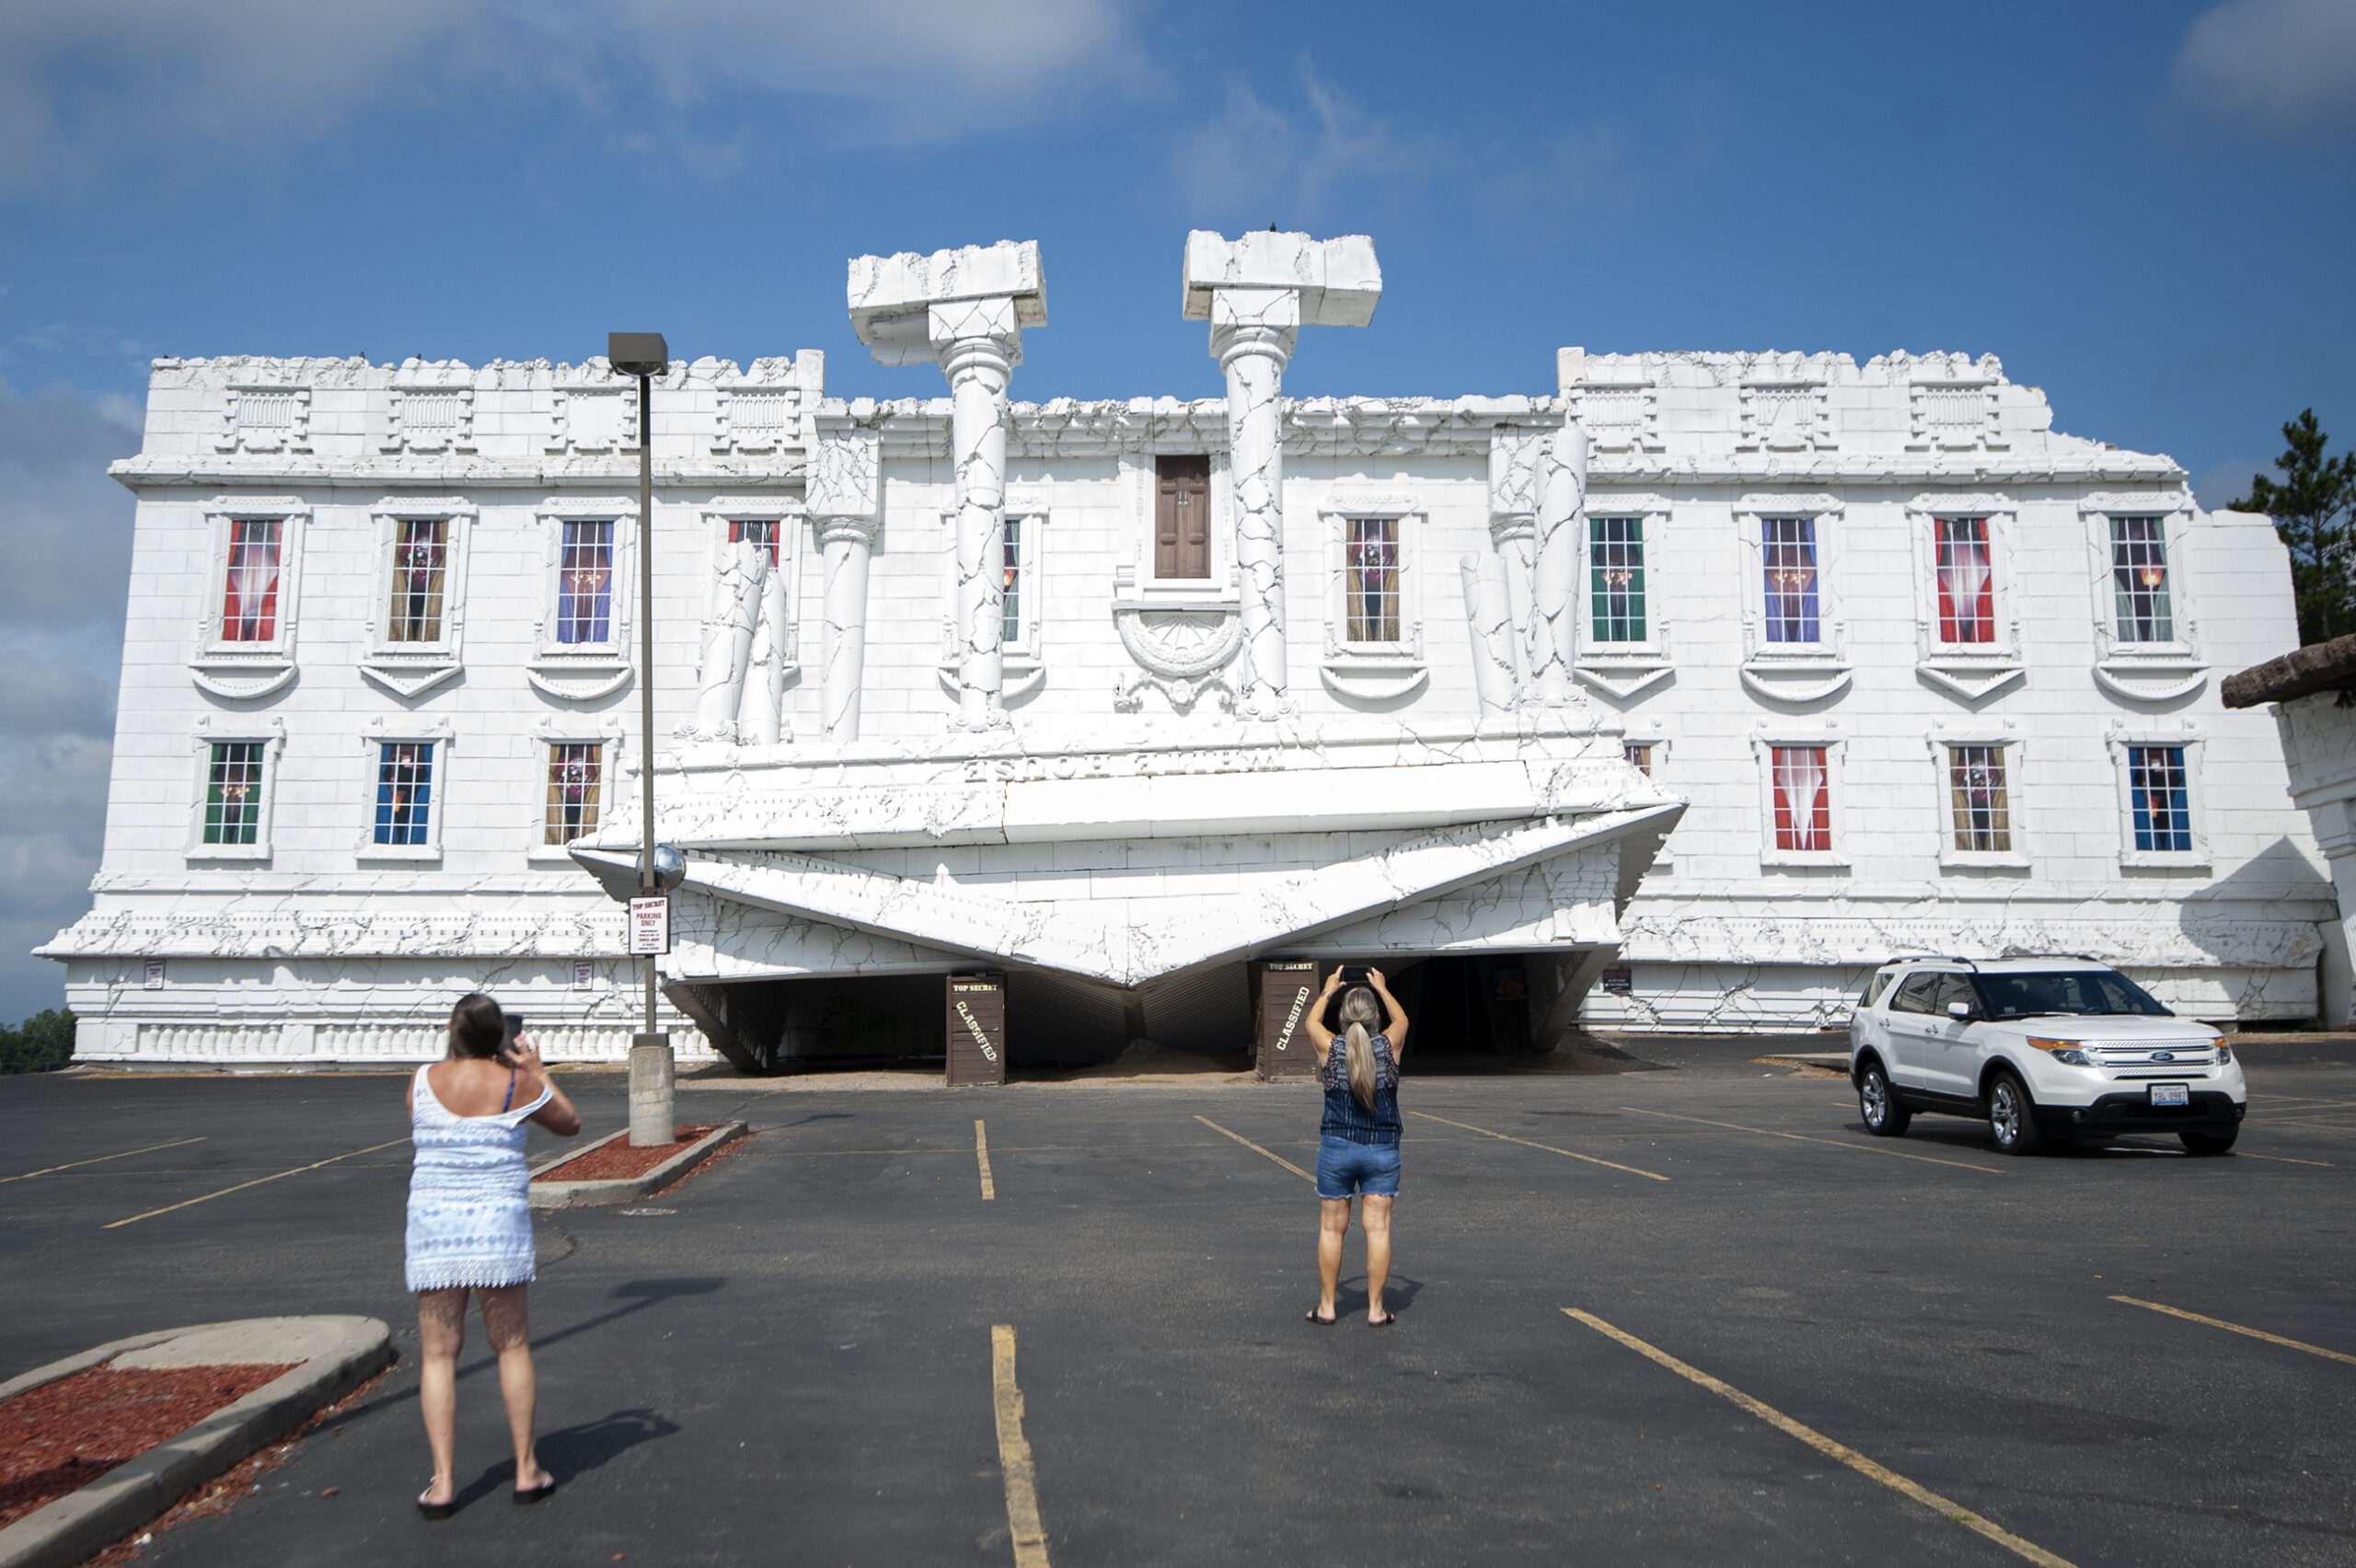 two people can be seen from behind taking photos in a parking lot of the upside down White House in the dells